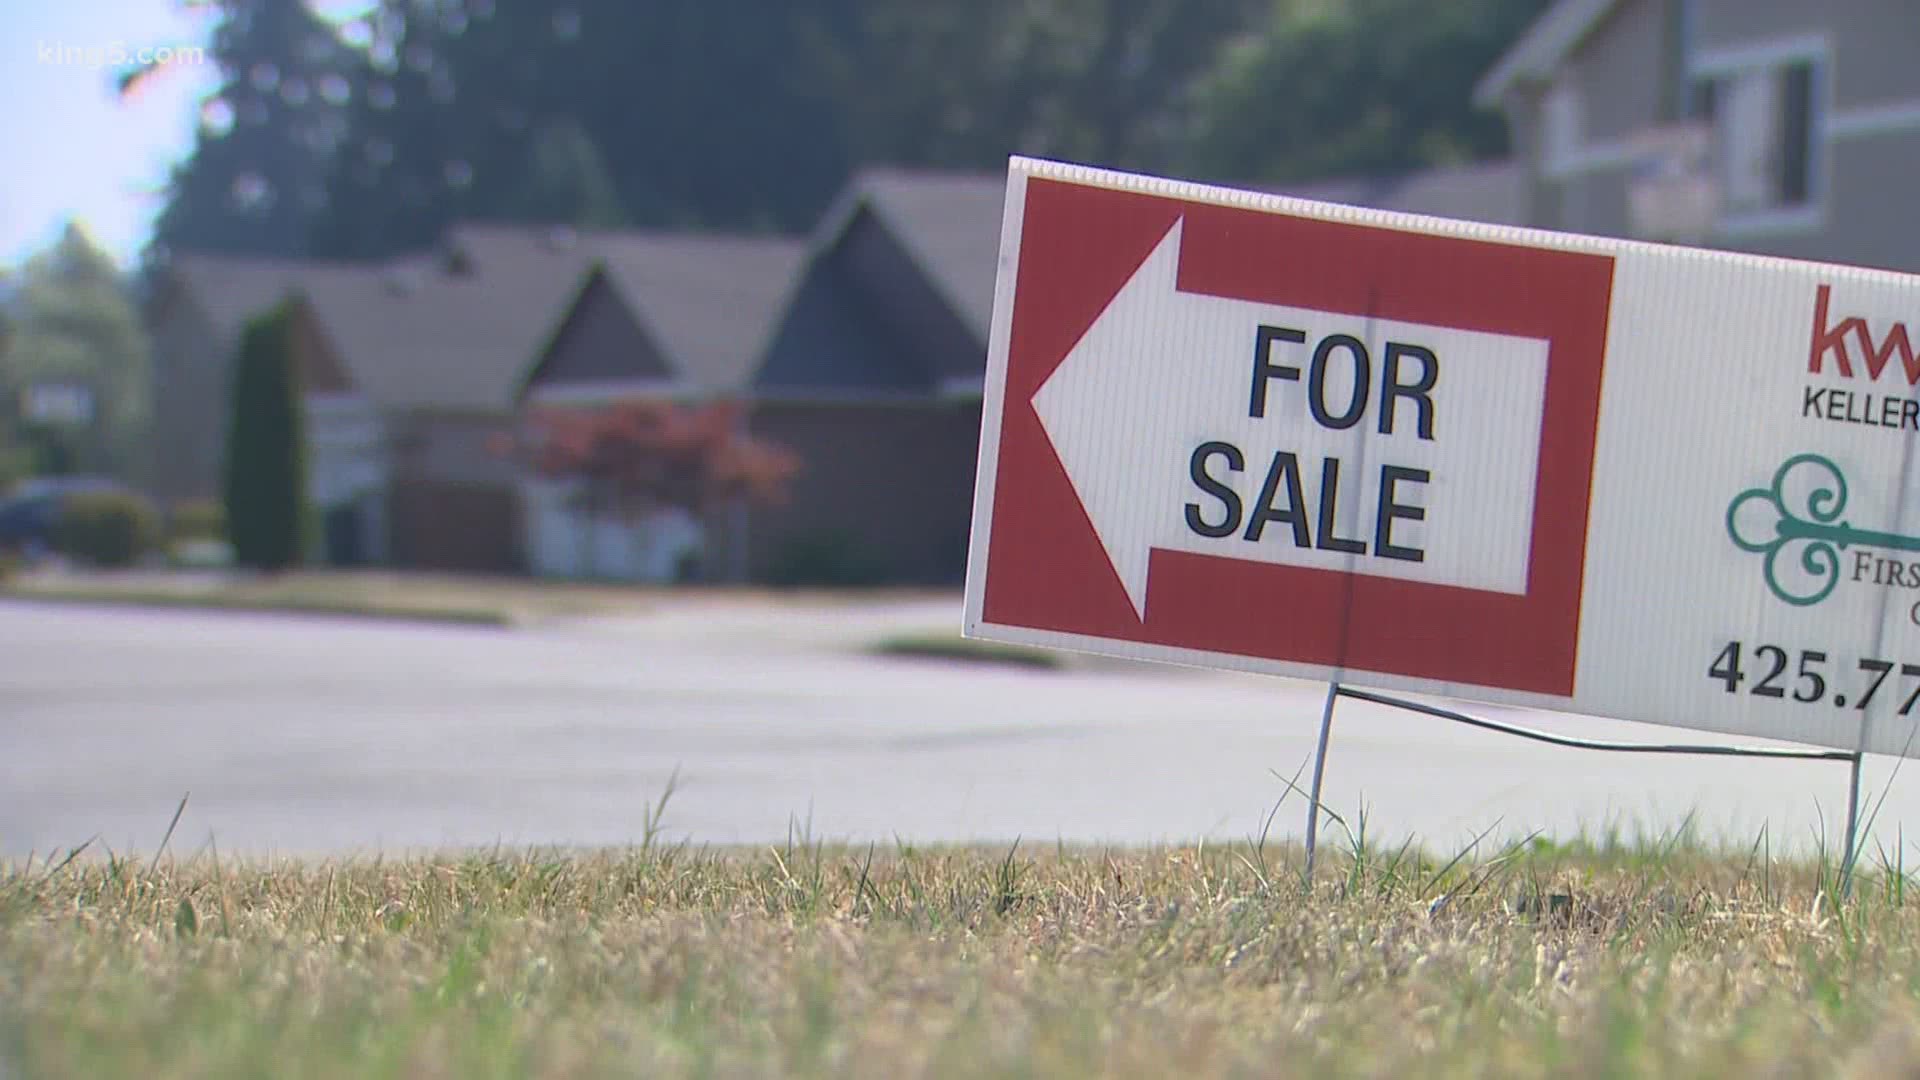 Prices have soared, as Snohomish County saw a 16% increase in home sales over this time last year and a low inventory of houses for sale.